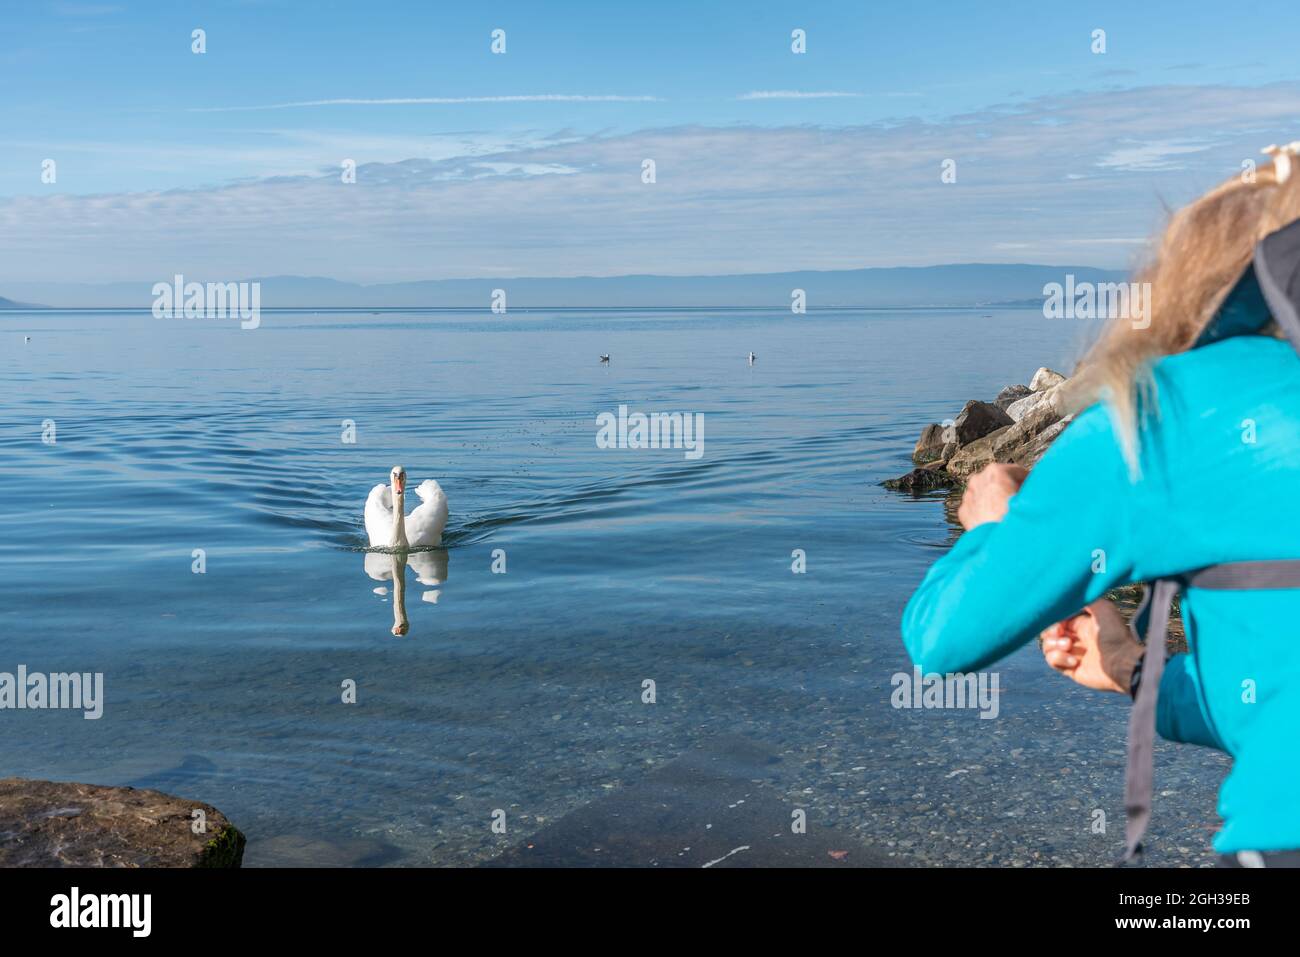 Selective focus on a swan swimming towards a blonde woman feeding him at the edge of a lake with calm, blue water Stock Photo